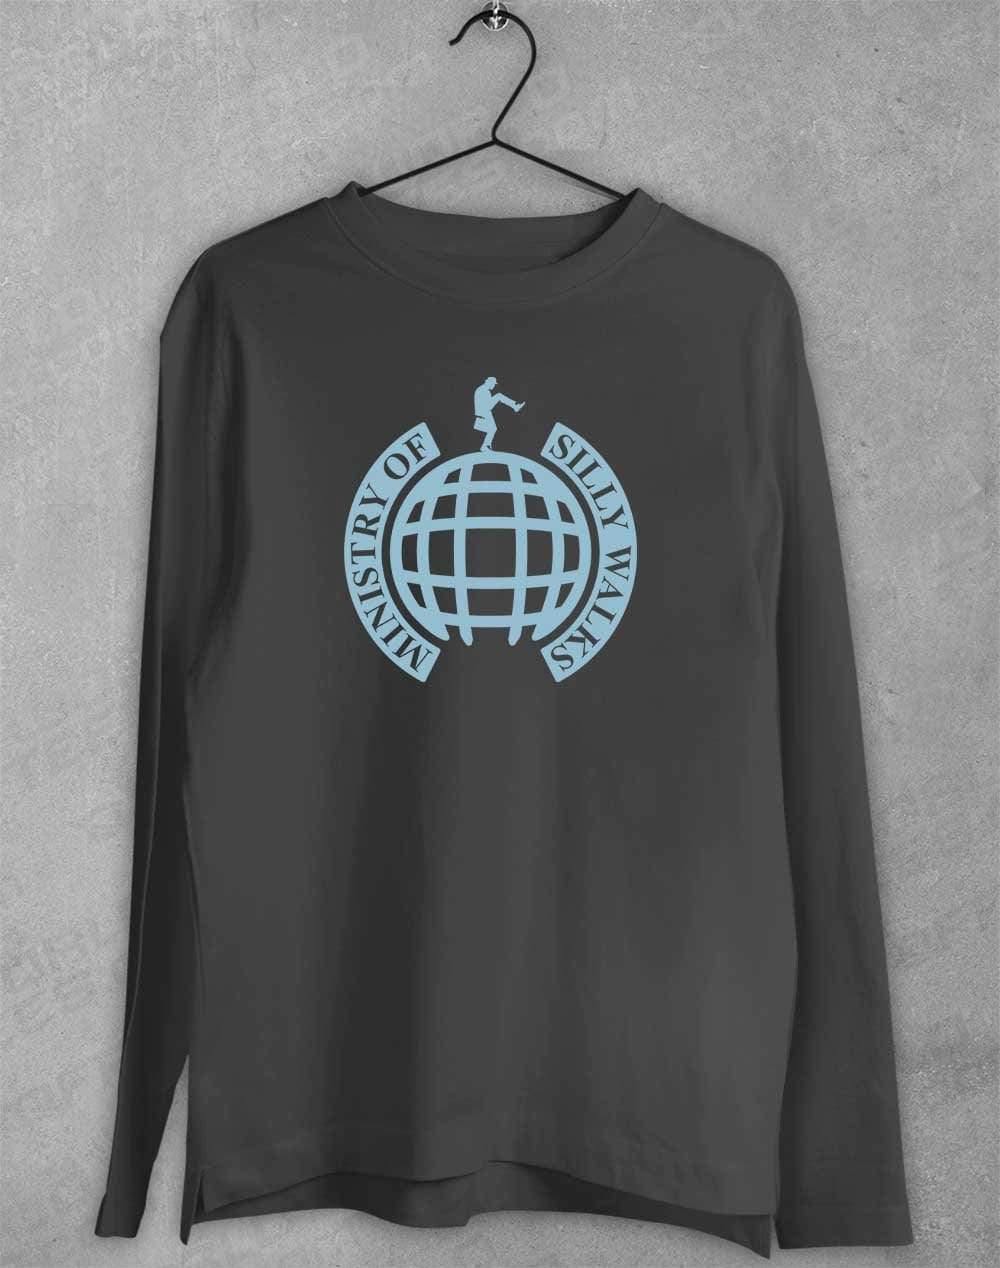 Ministry of Silly Walks Long Sleeve T-Shirt S / Charcoal  - Off World Tees